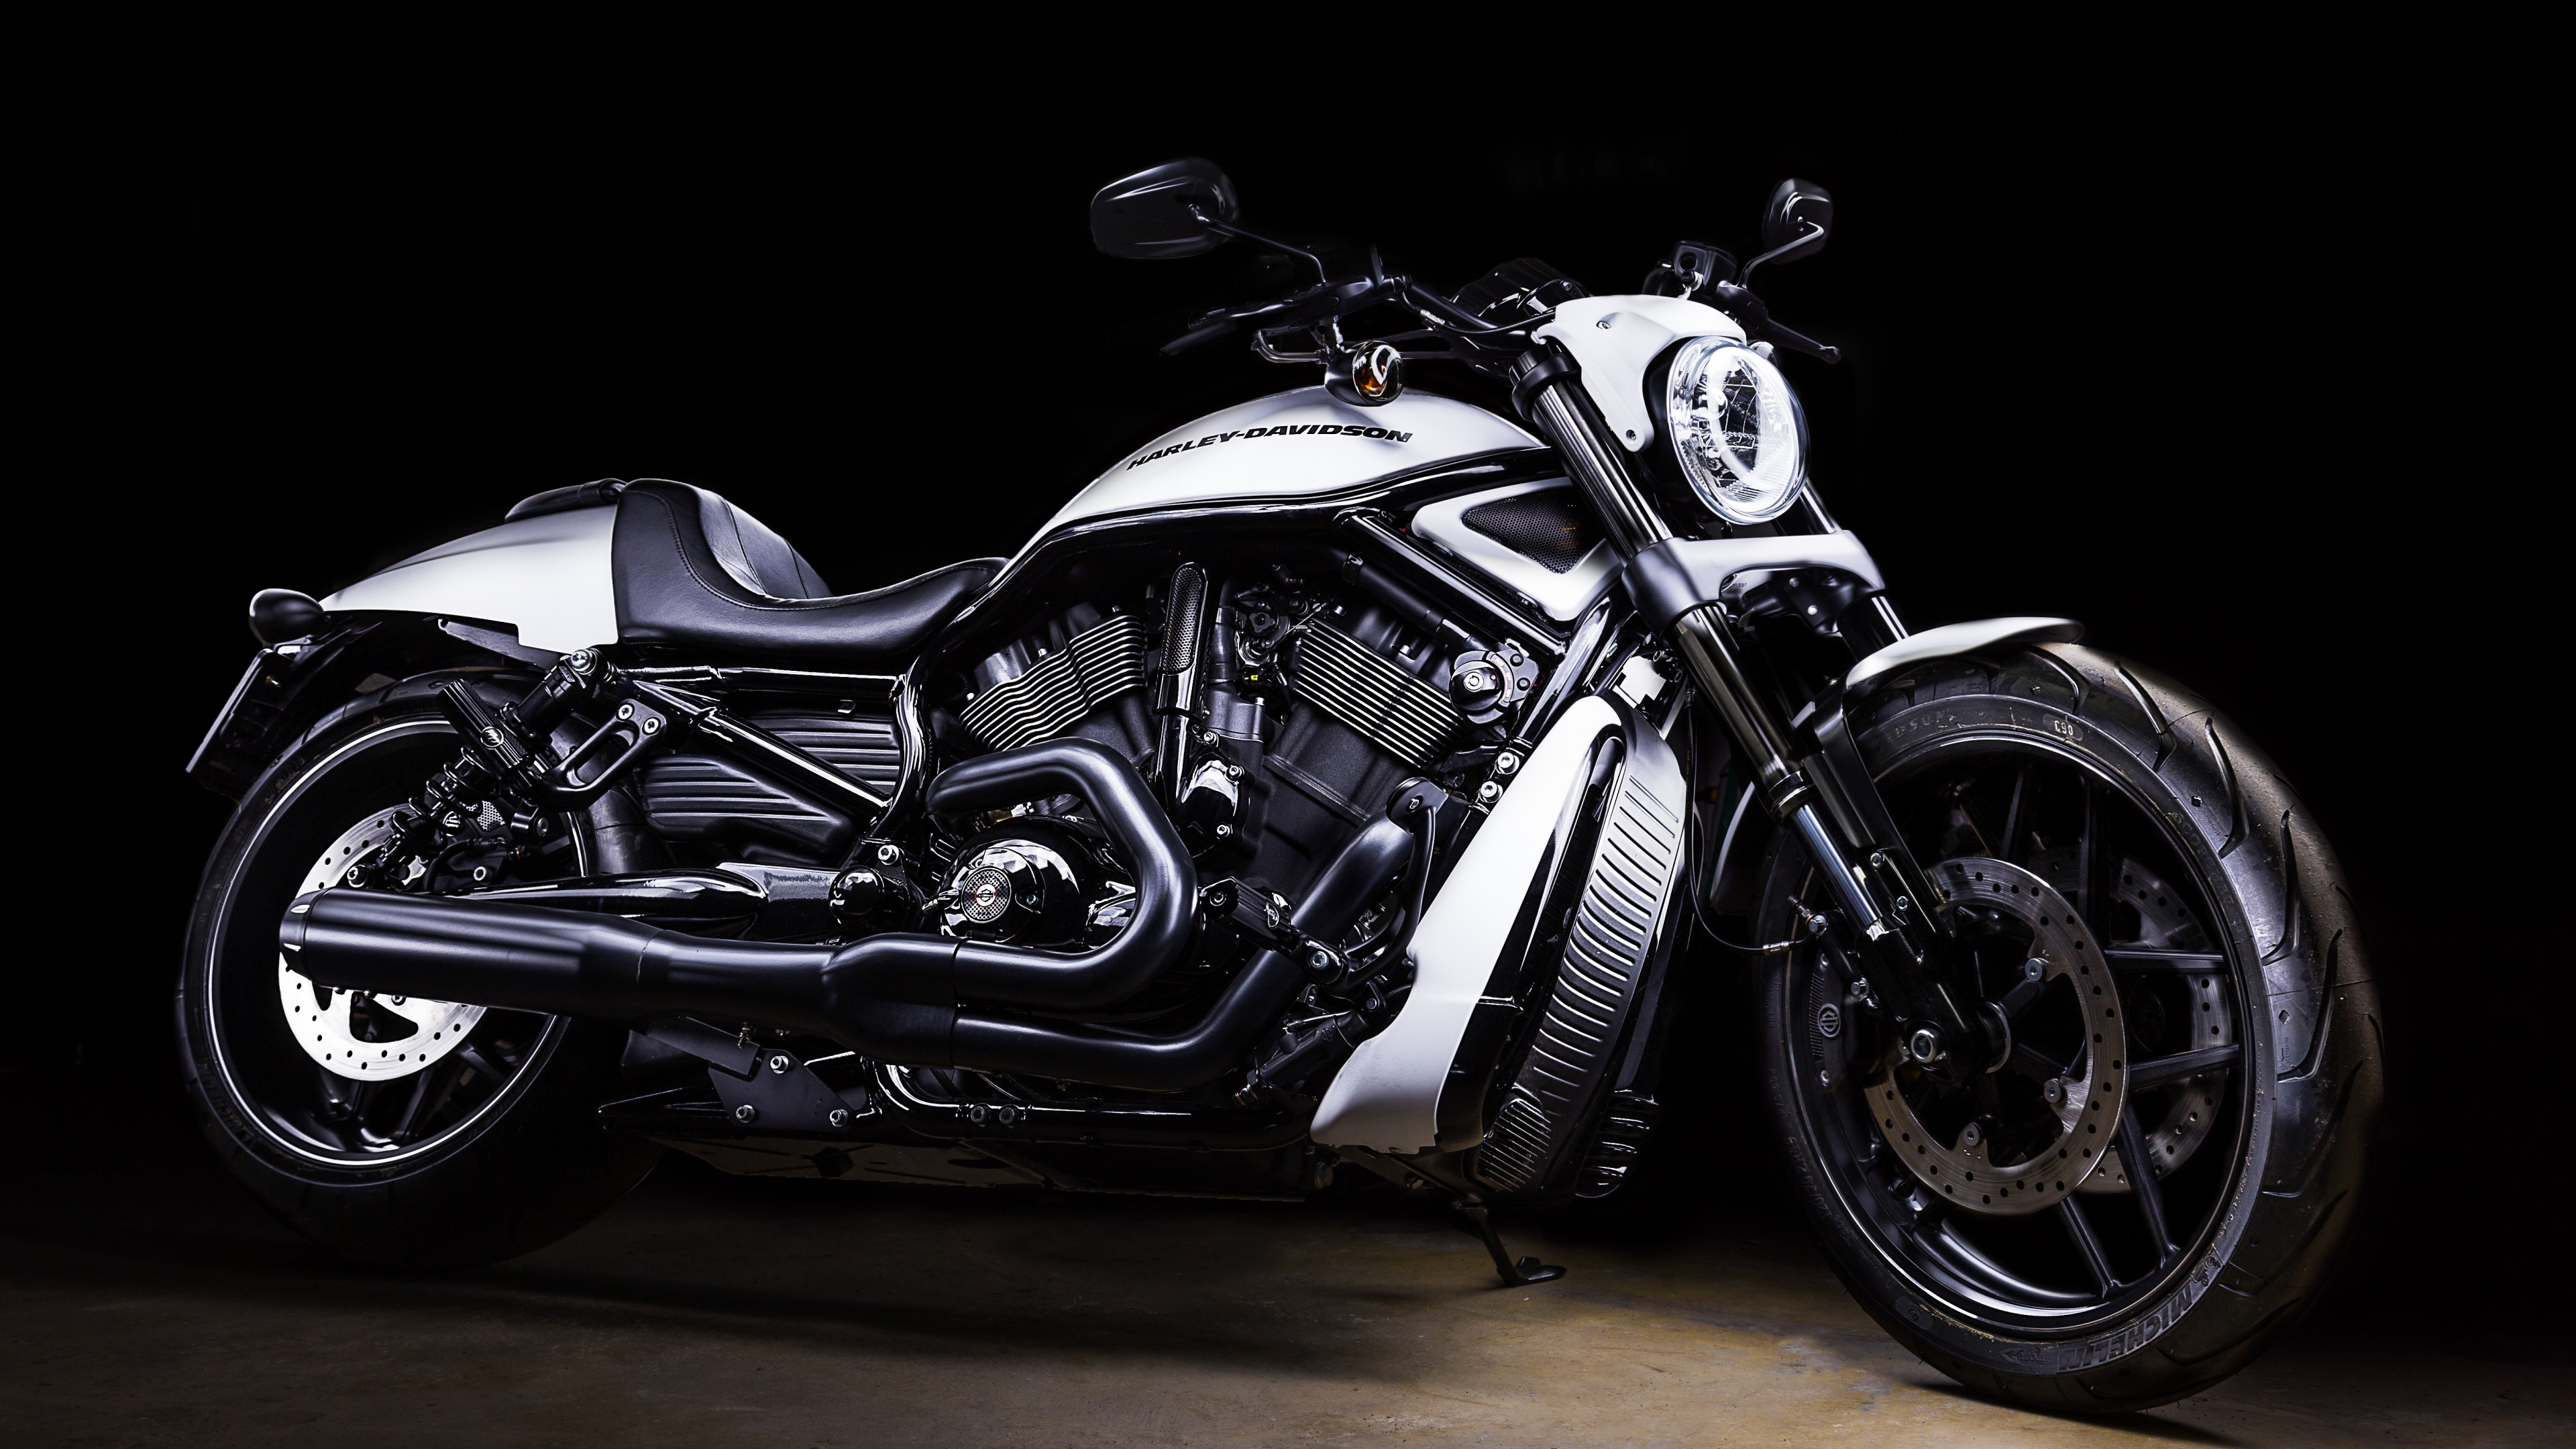 Black and Silver Cruiser Motorcycle. Wallpaper in 3840x2160 Resolution